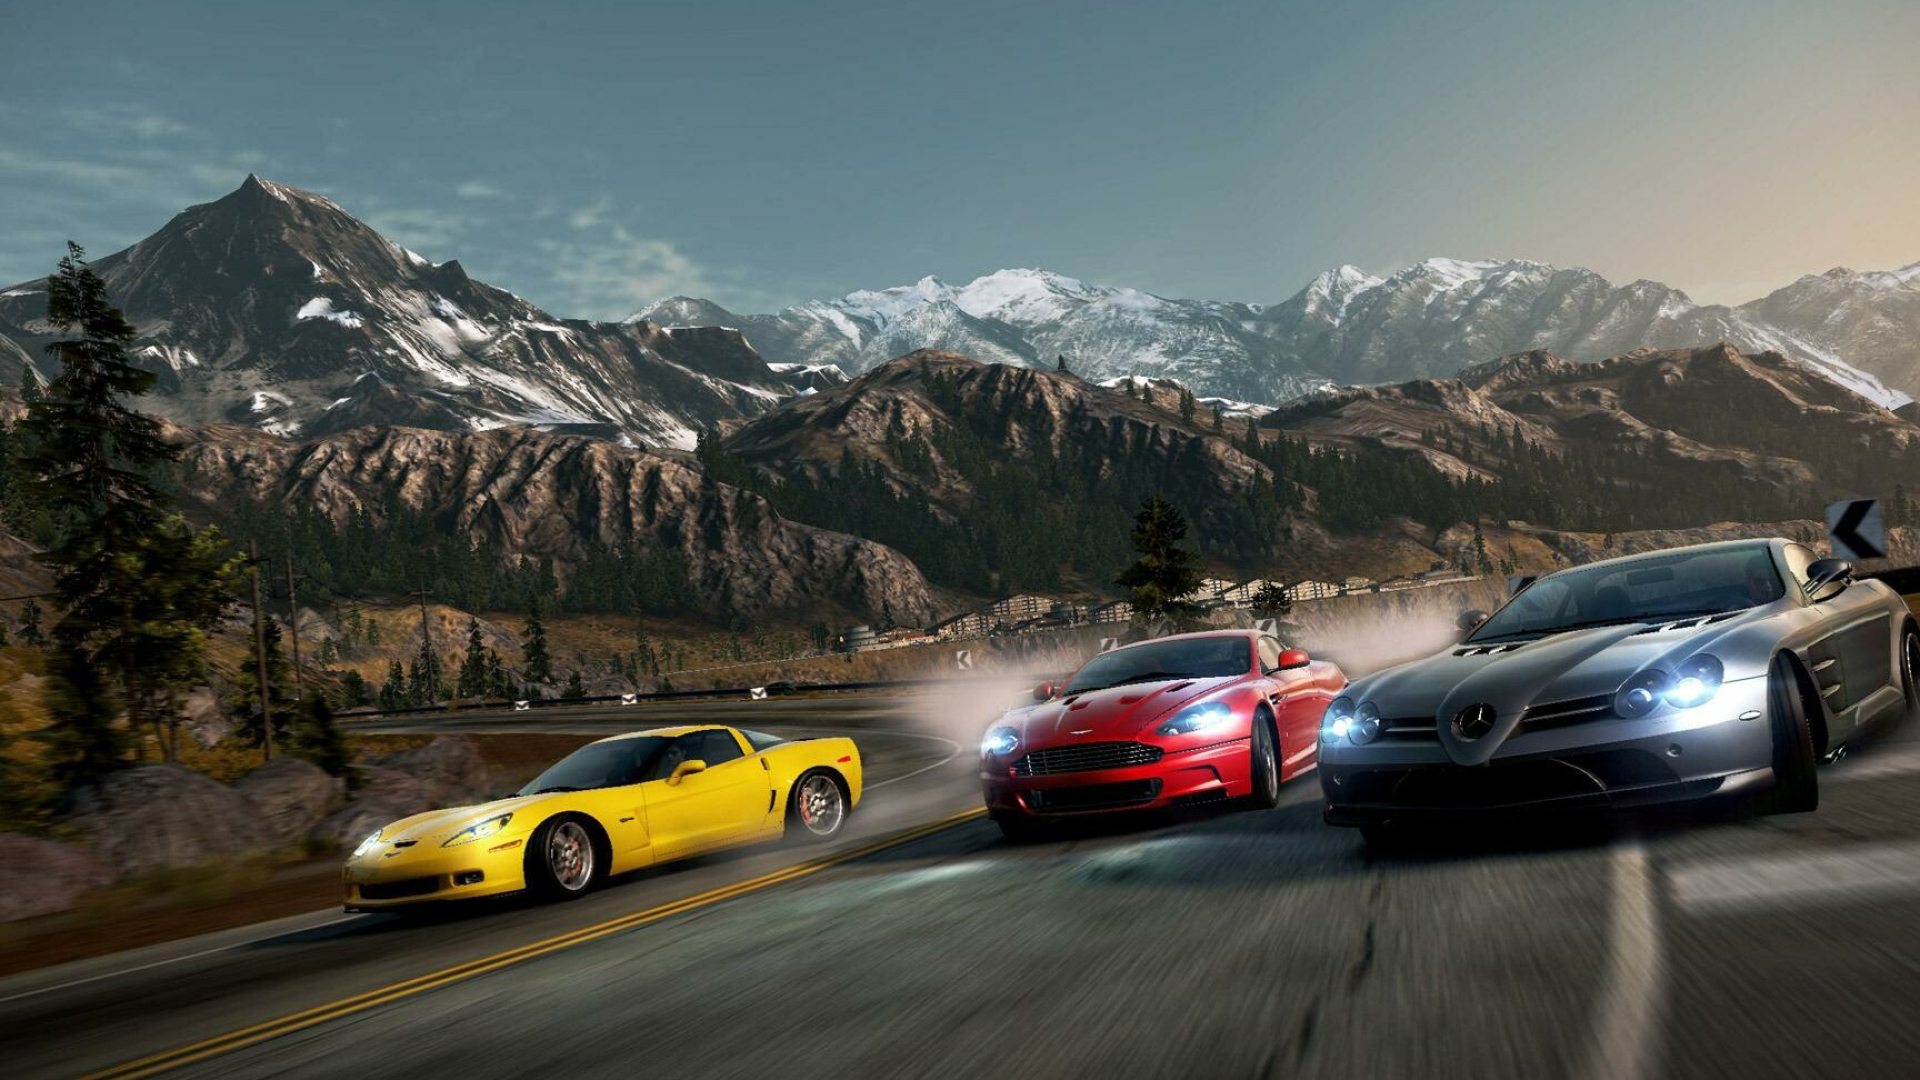 Need for Speed Hot Pursuit Remastered: An "Autolog" system allows players to compare their performance with friends and rivals. 1920x1080 Full HD Wallpaper.